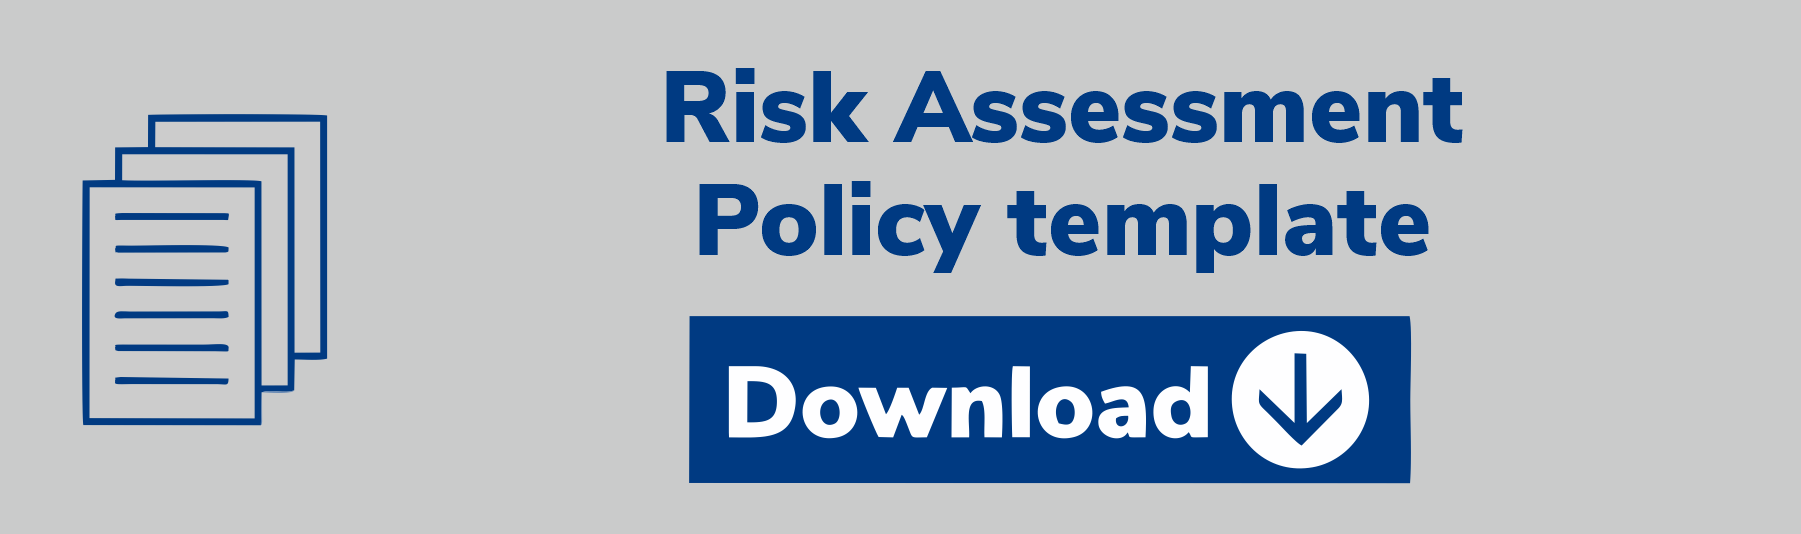 Risk Assessment Policy template